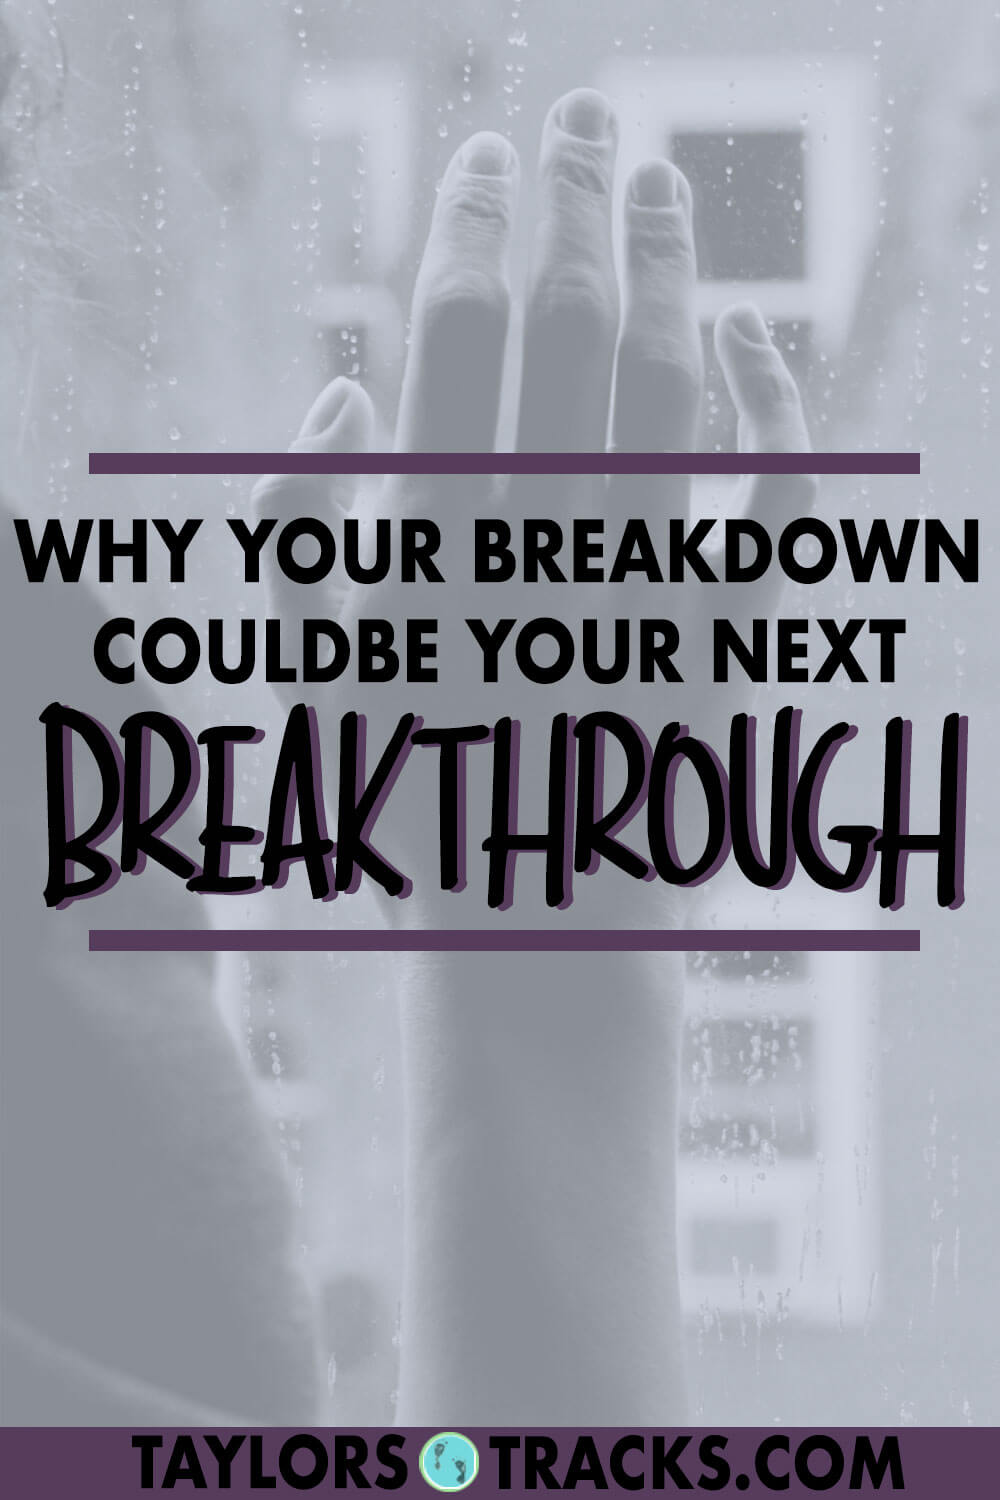 Your breakdowns are not something to be ashamed of or be hard on yourself for, because it is often the breakdowns that really lead to breakthroughs. Click to find out how you can breakthrough to live your best life, be your best life and see your breakdowns as opportunities to work on your personal development.